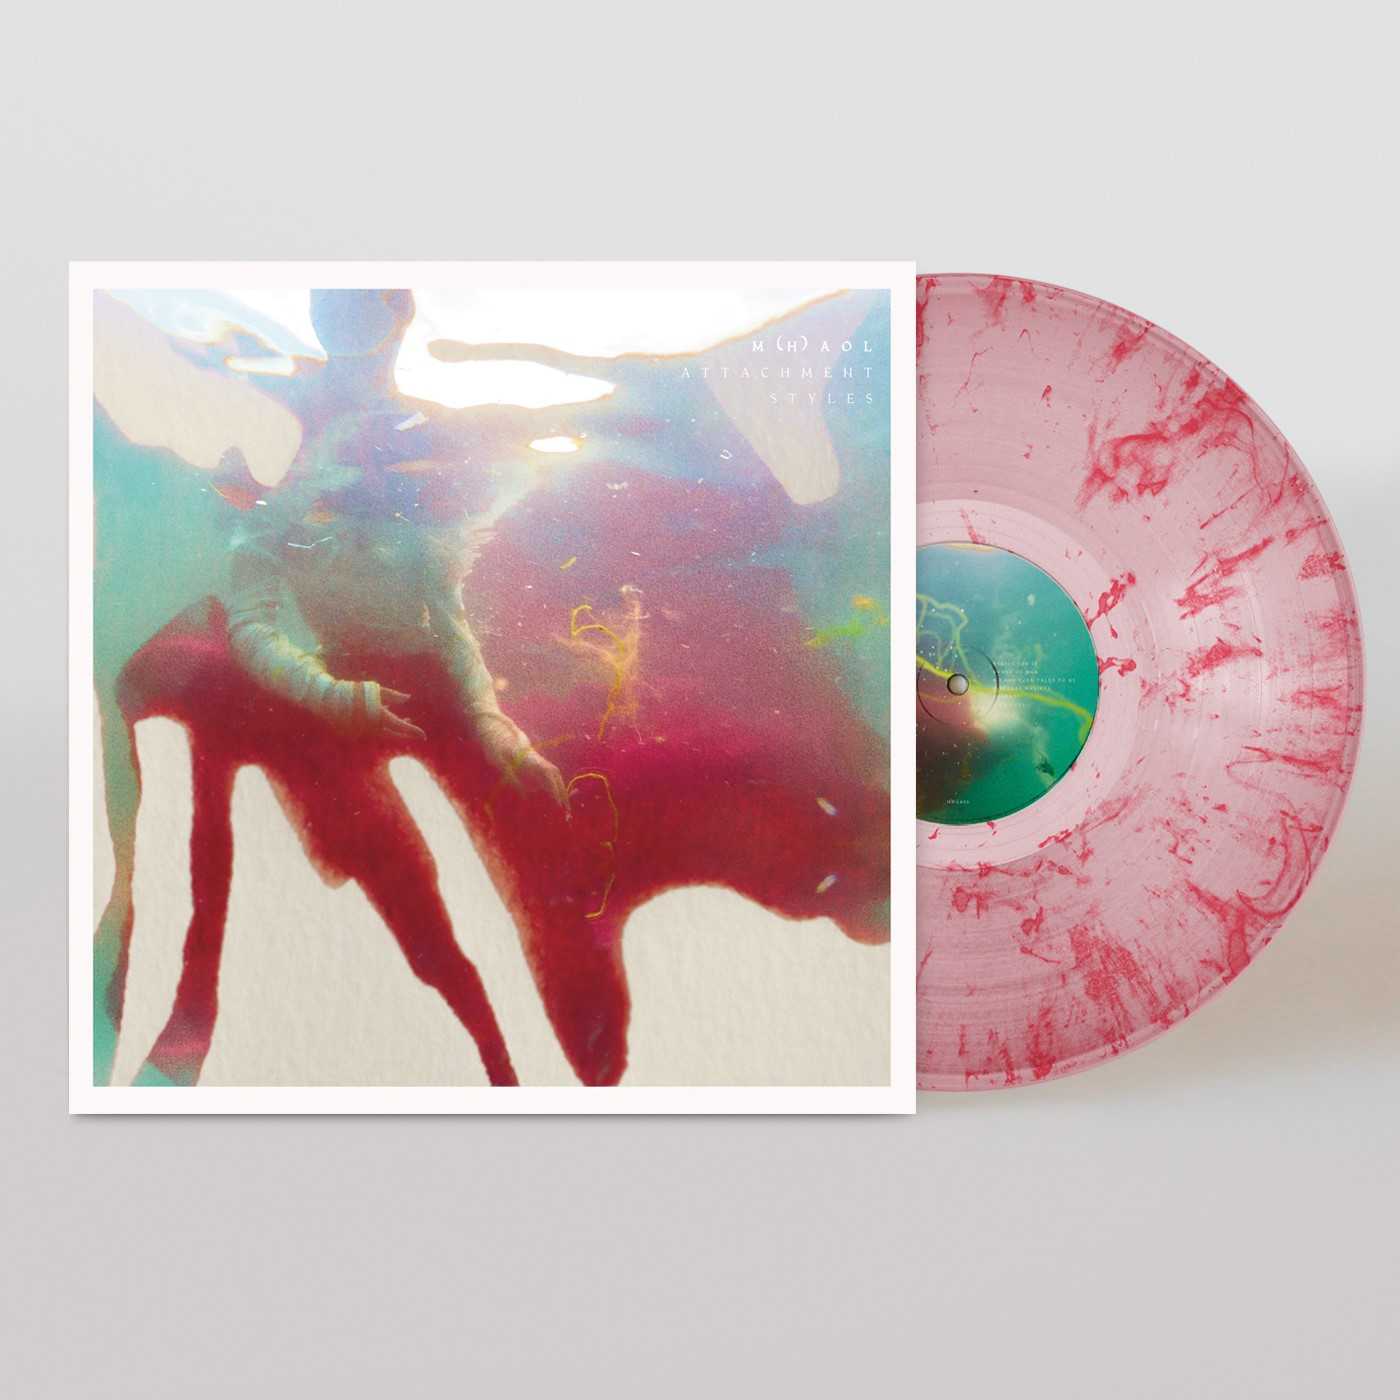 PREORDER: M(h)aol -  Attachment Styles [PEAK EDITION clear & red swirl vinyl] – New LP